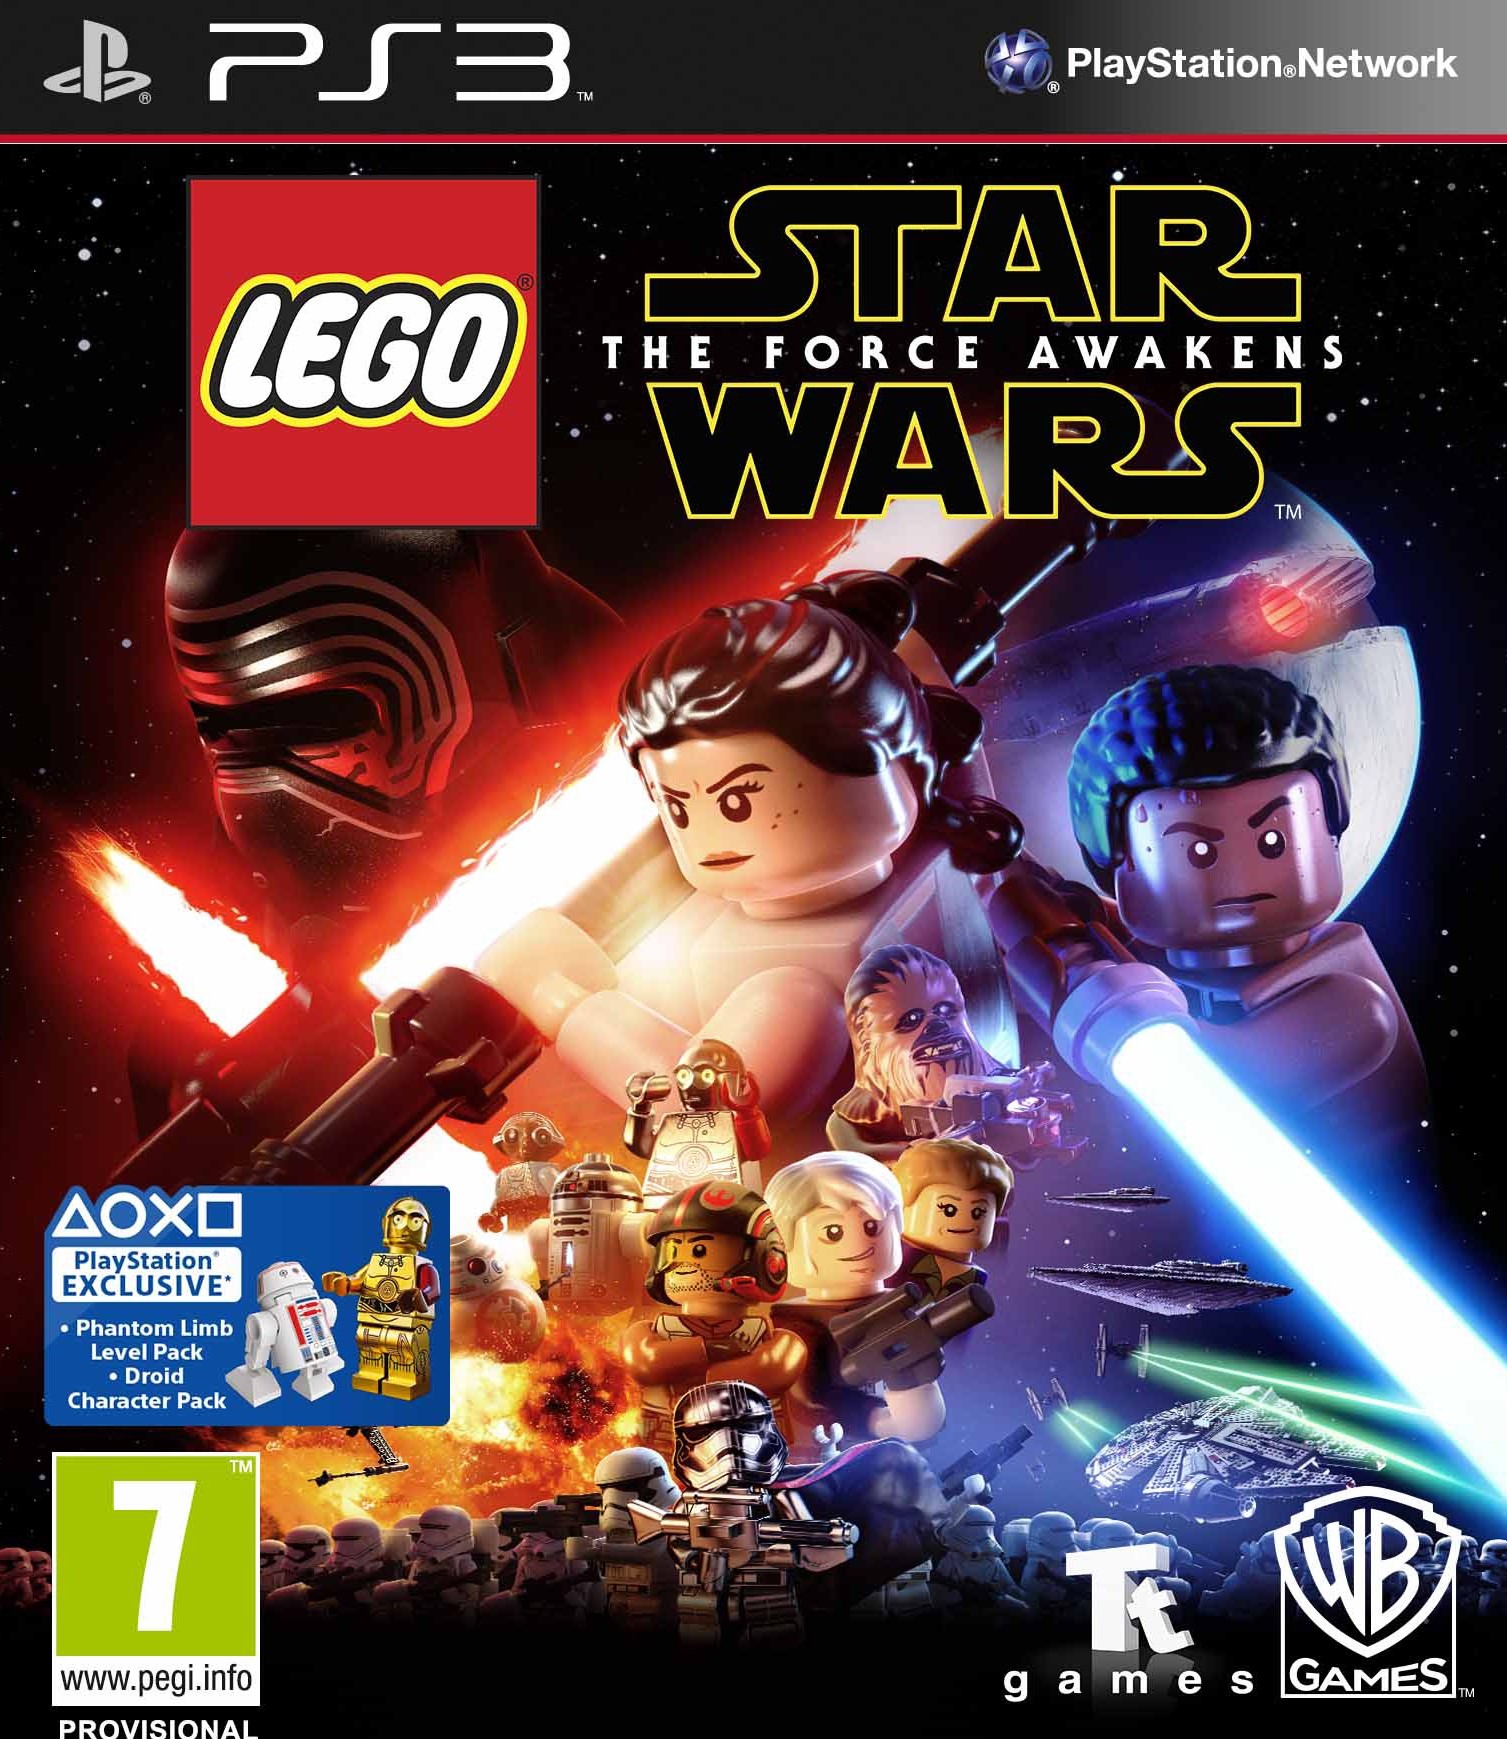 LEGO Star Wars - The Force Awakens - Playstation 3 Games